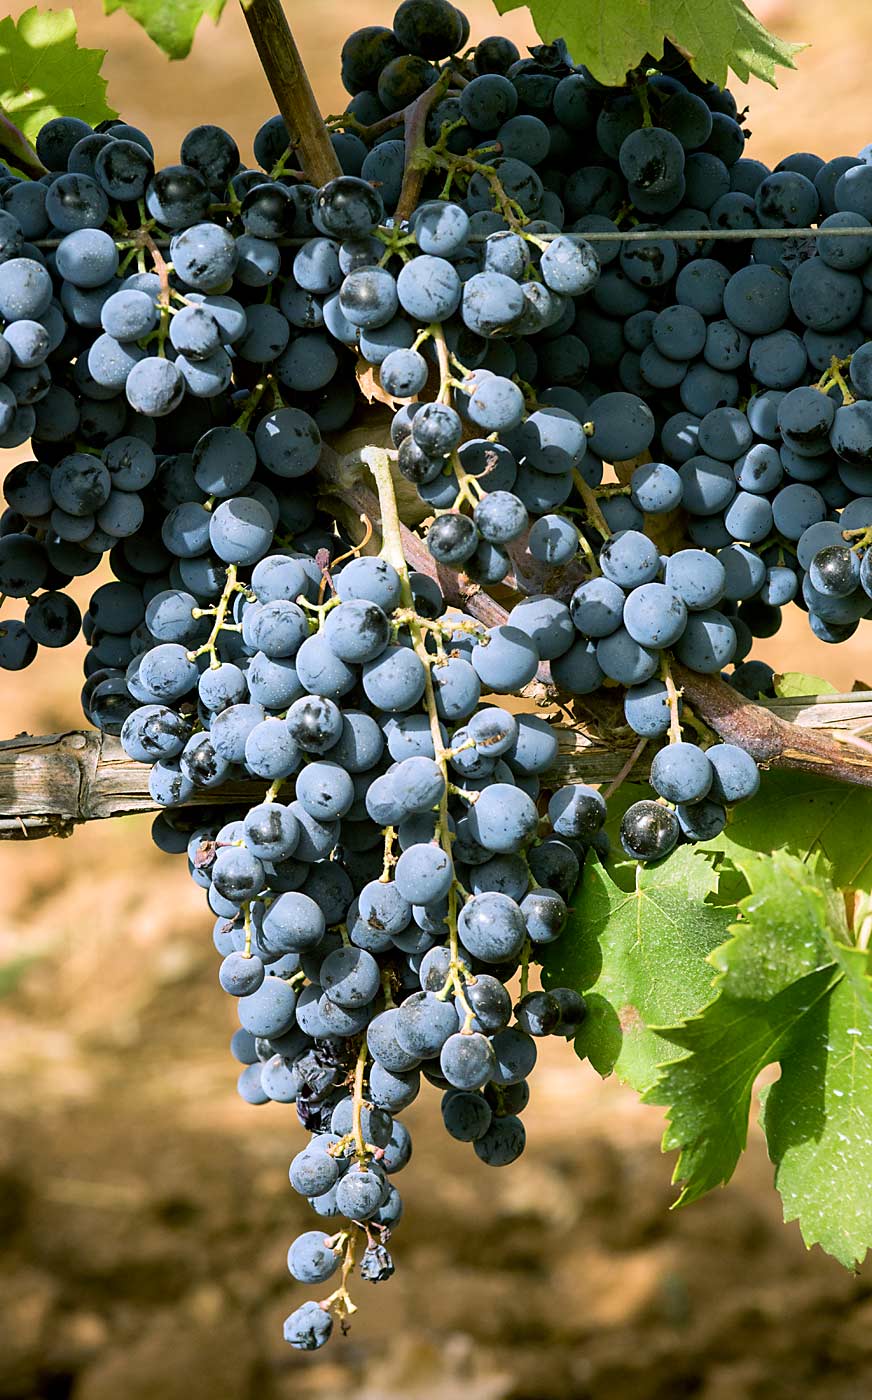 Orisi is one of six grape varieties thought extinct, but rediscovered, that was recently added to the Italian National Register of Grape Varieties. (Courtesy Santa Tresa vineyard)